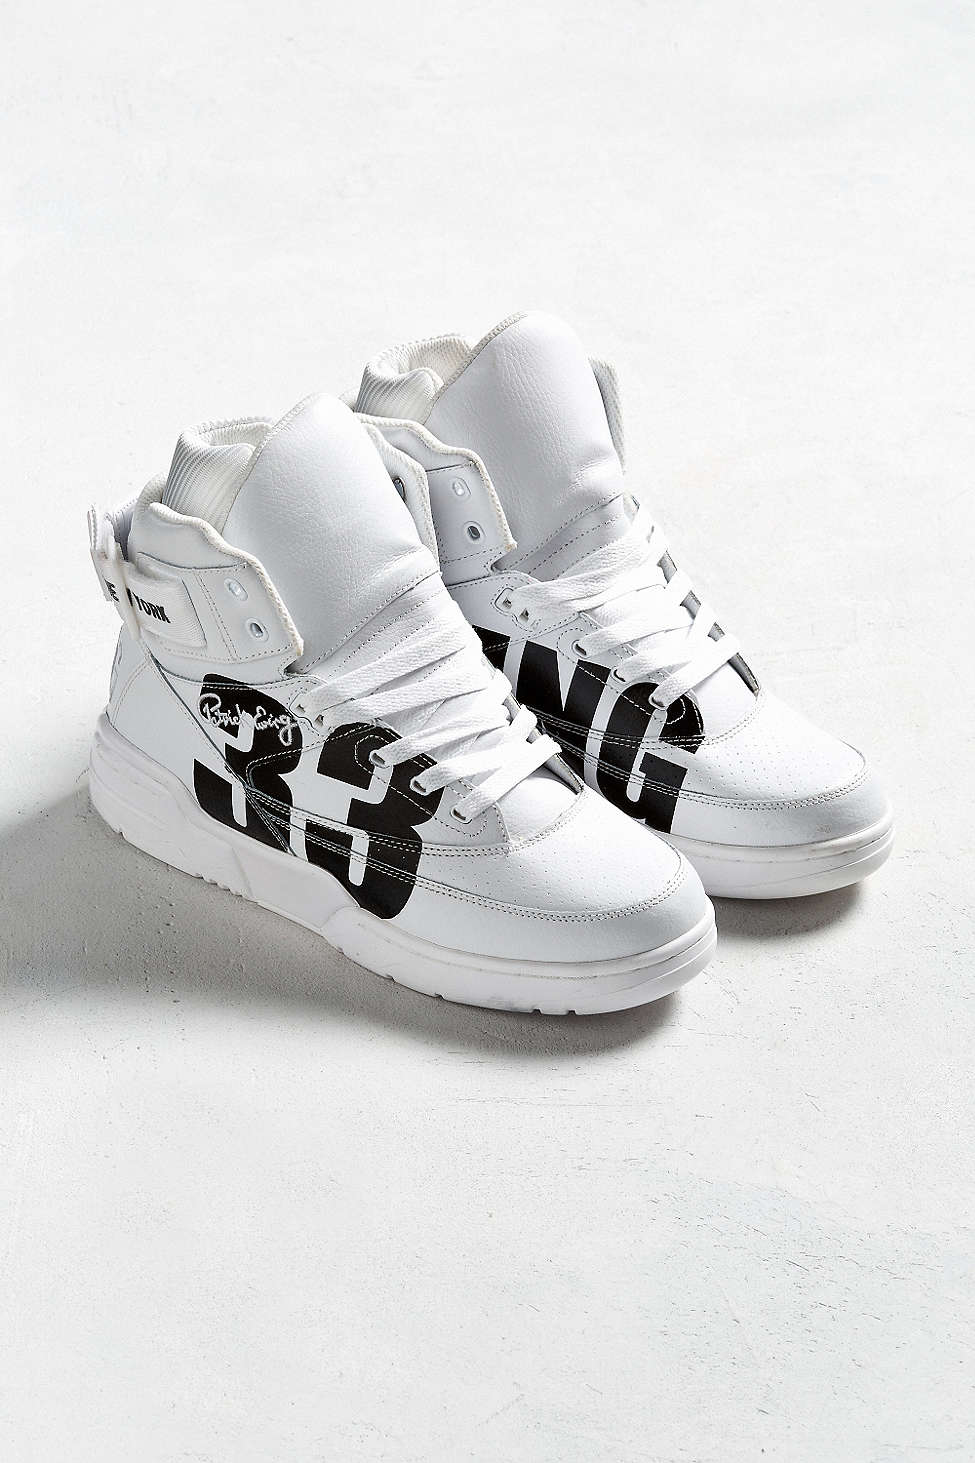 urban outfitters x ewing 33 hi NYC white black 3